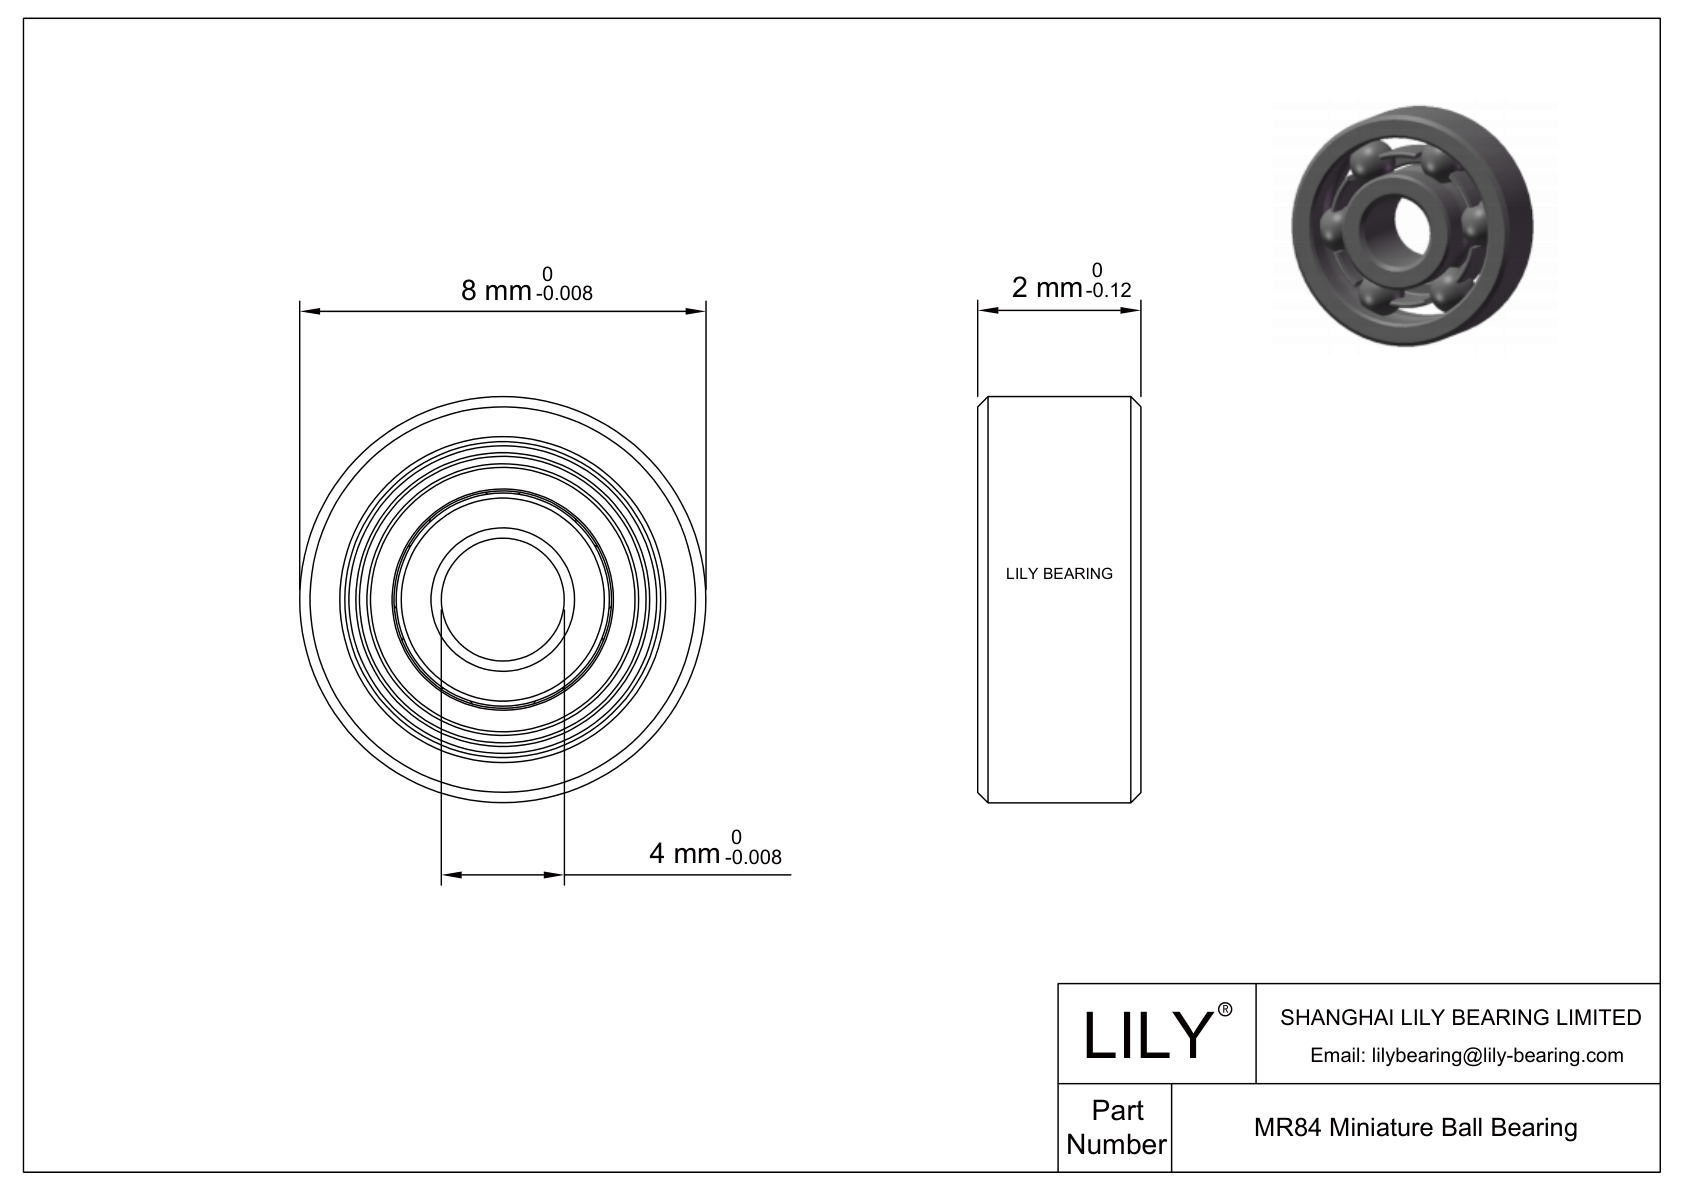 LILY-BSTMR8412-20 Outsourcing POM bearings cad drawing